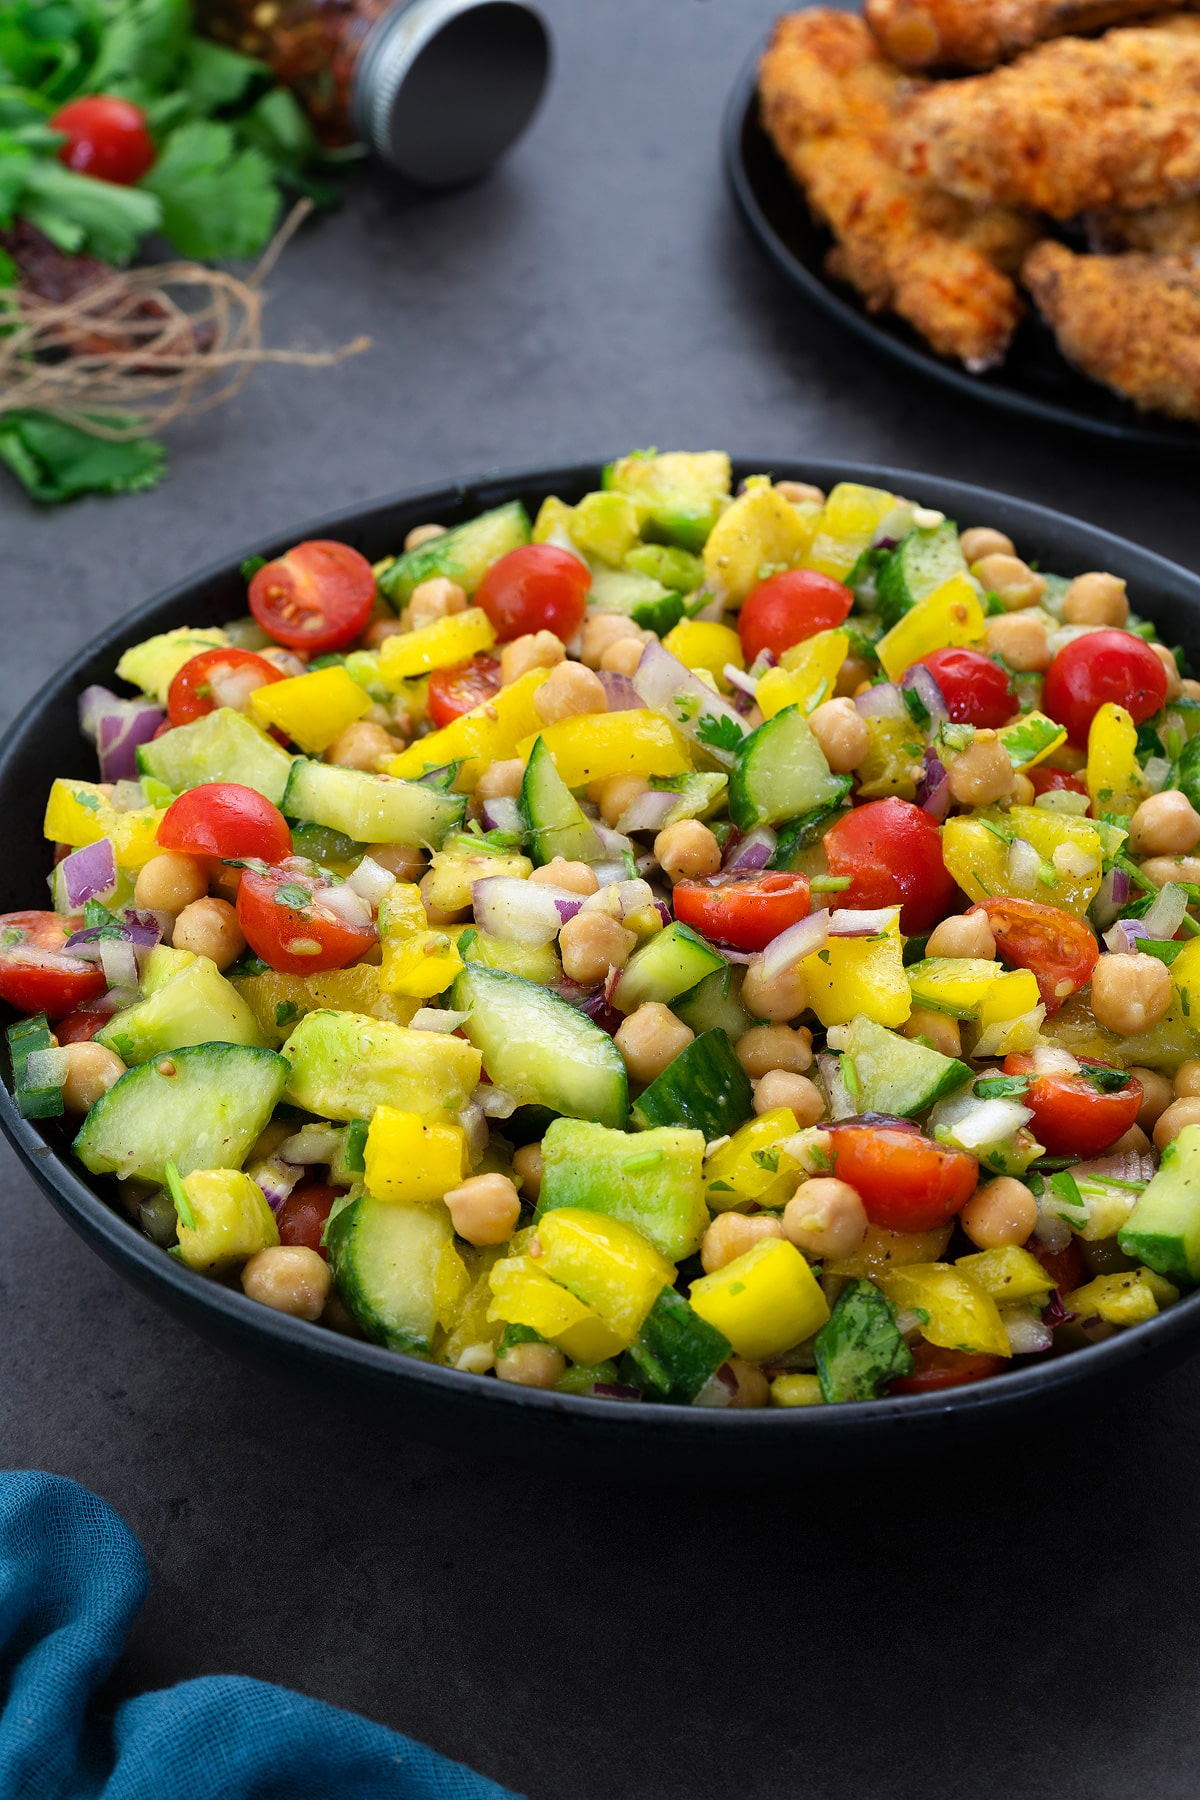 Chickpea salad in a black bowl on a grey table.  The salad is green, red and yellow, and it is surrounded by pieces of chicken and greens.